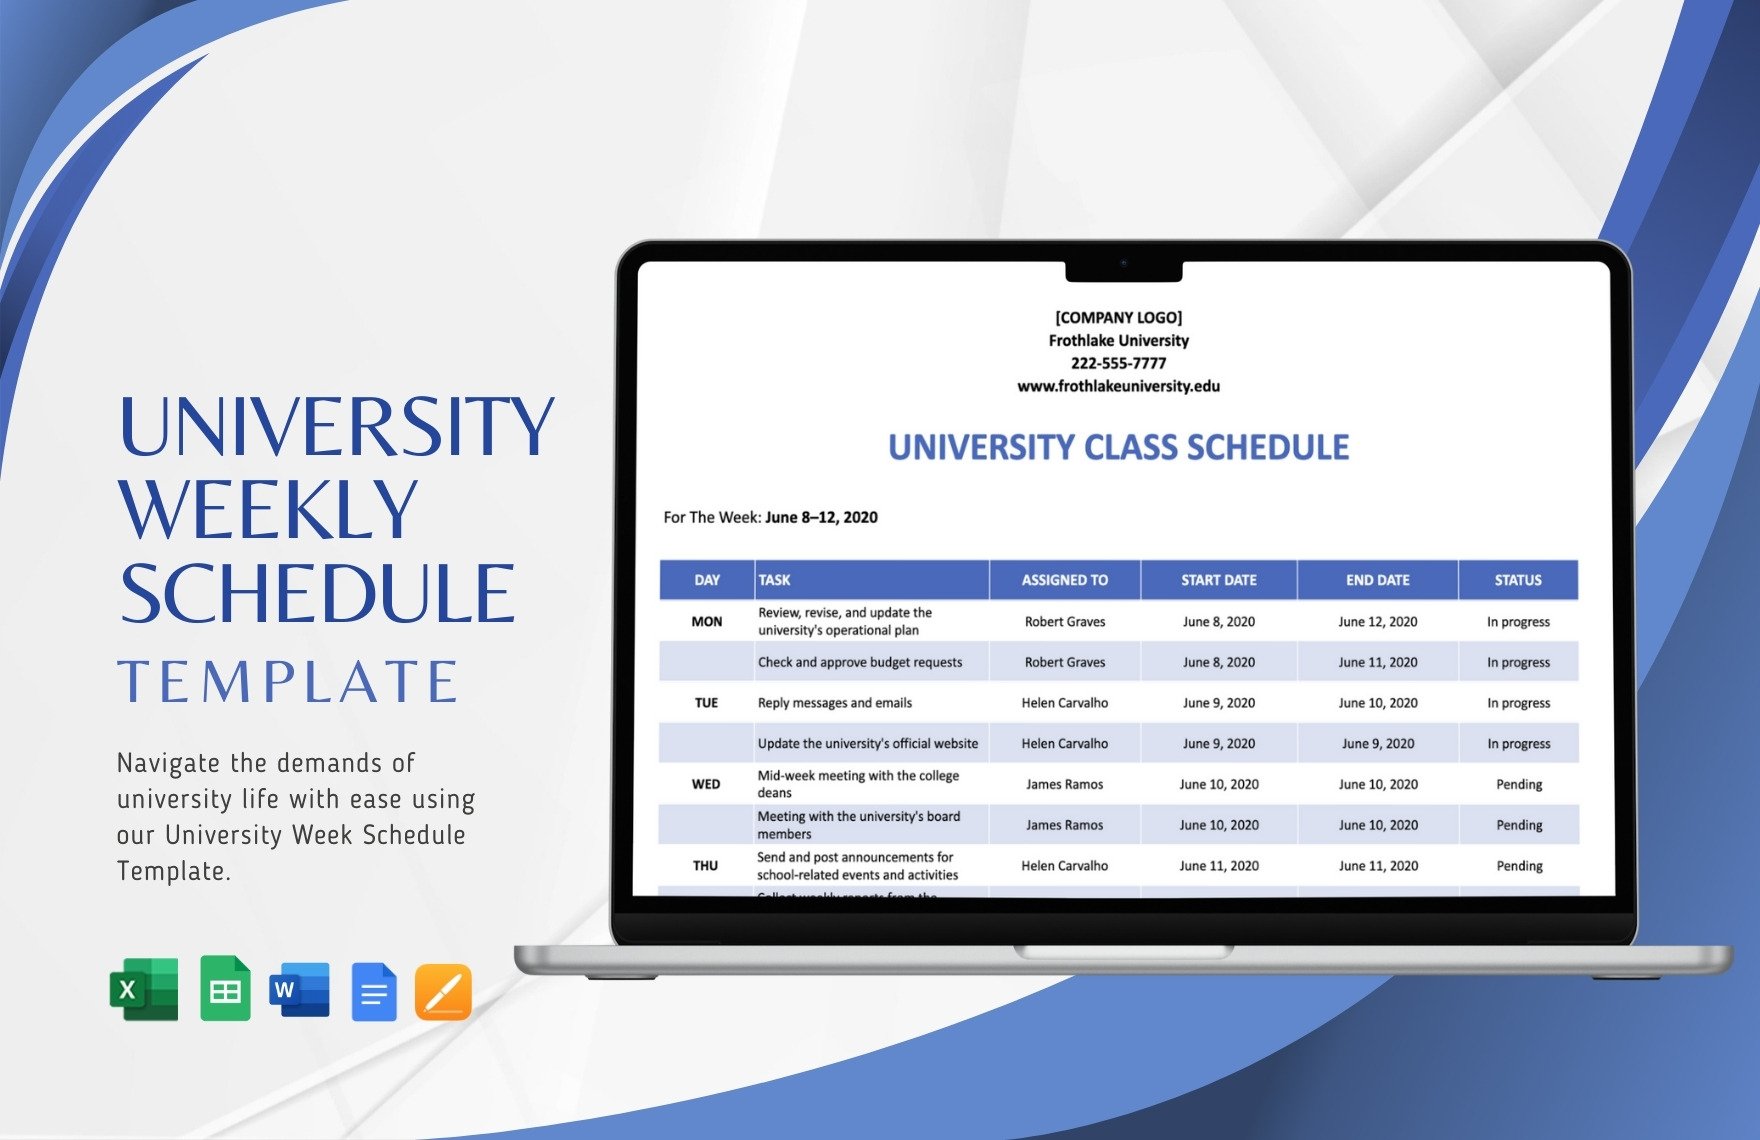 University Weekly Schedule Template in Word, Google Docs, Excel, Google Sheets, Apple Pages